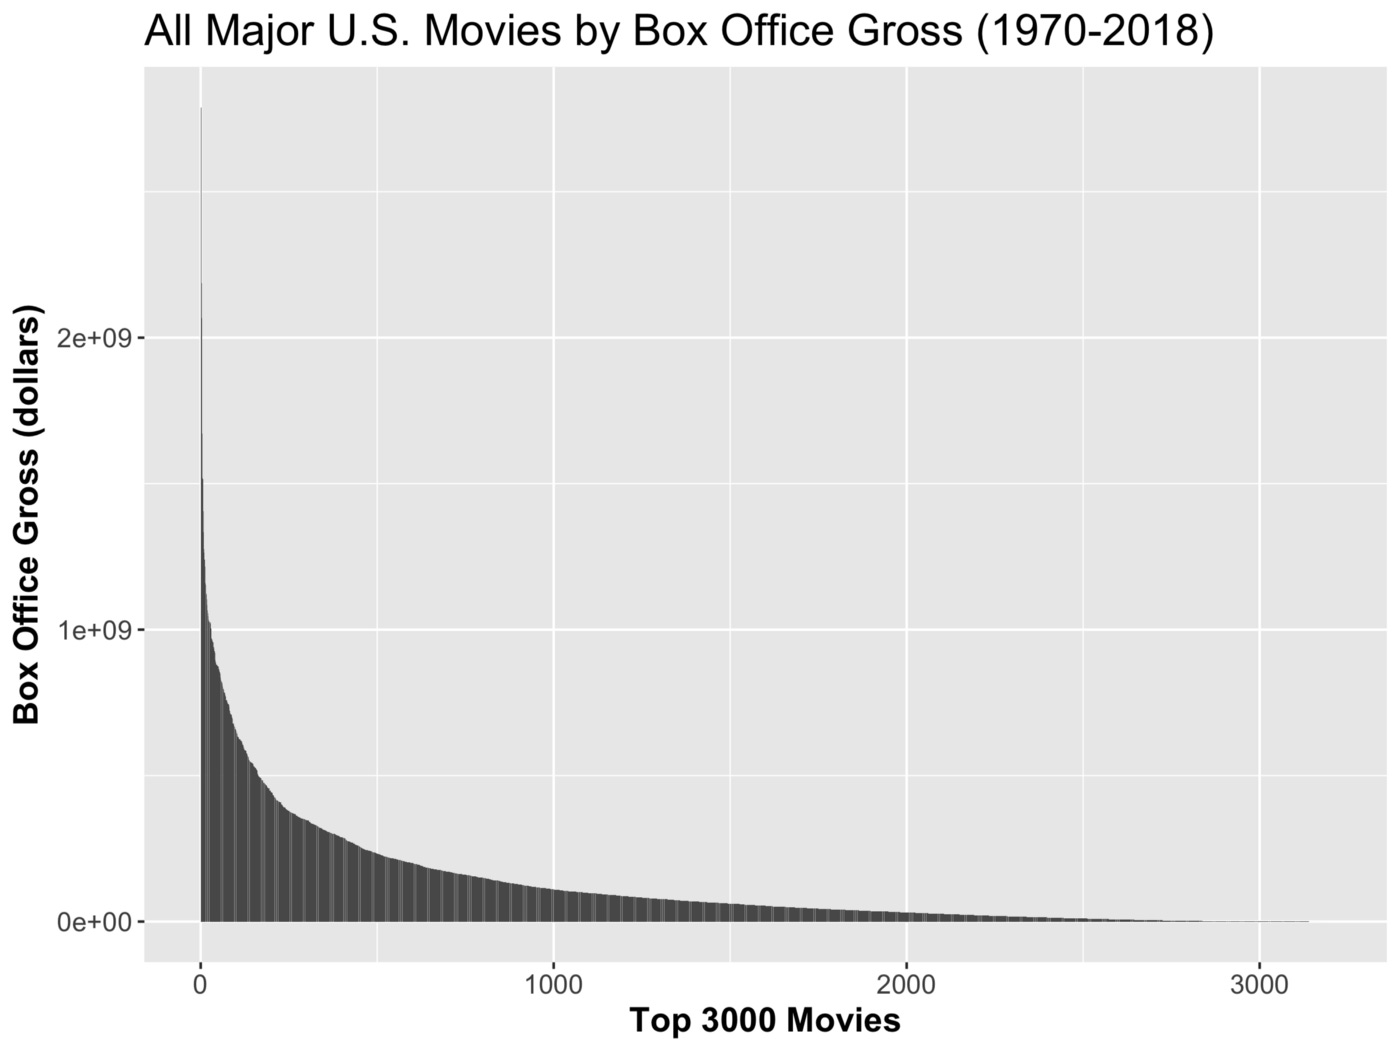 Movie box office collections follow a power law.